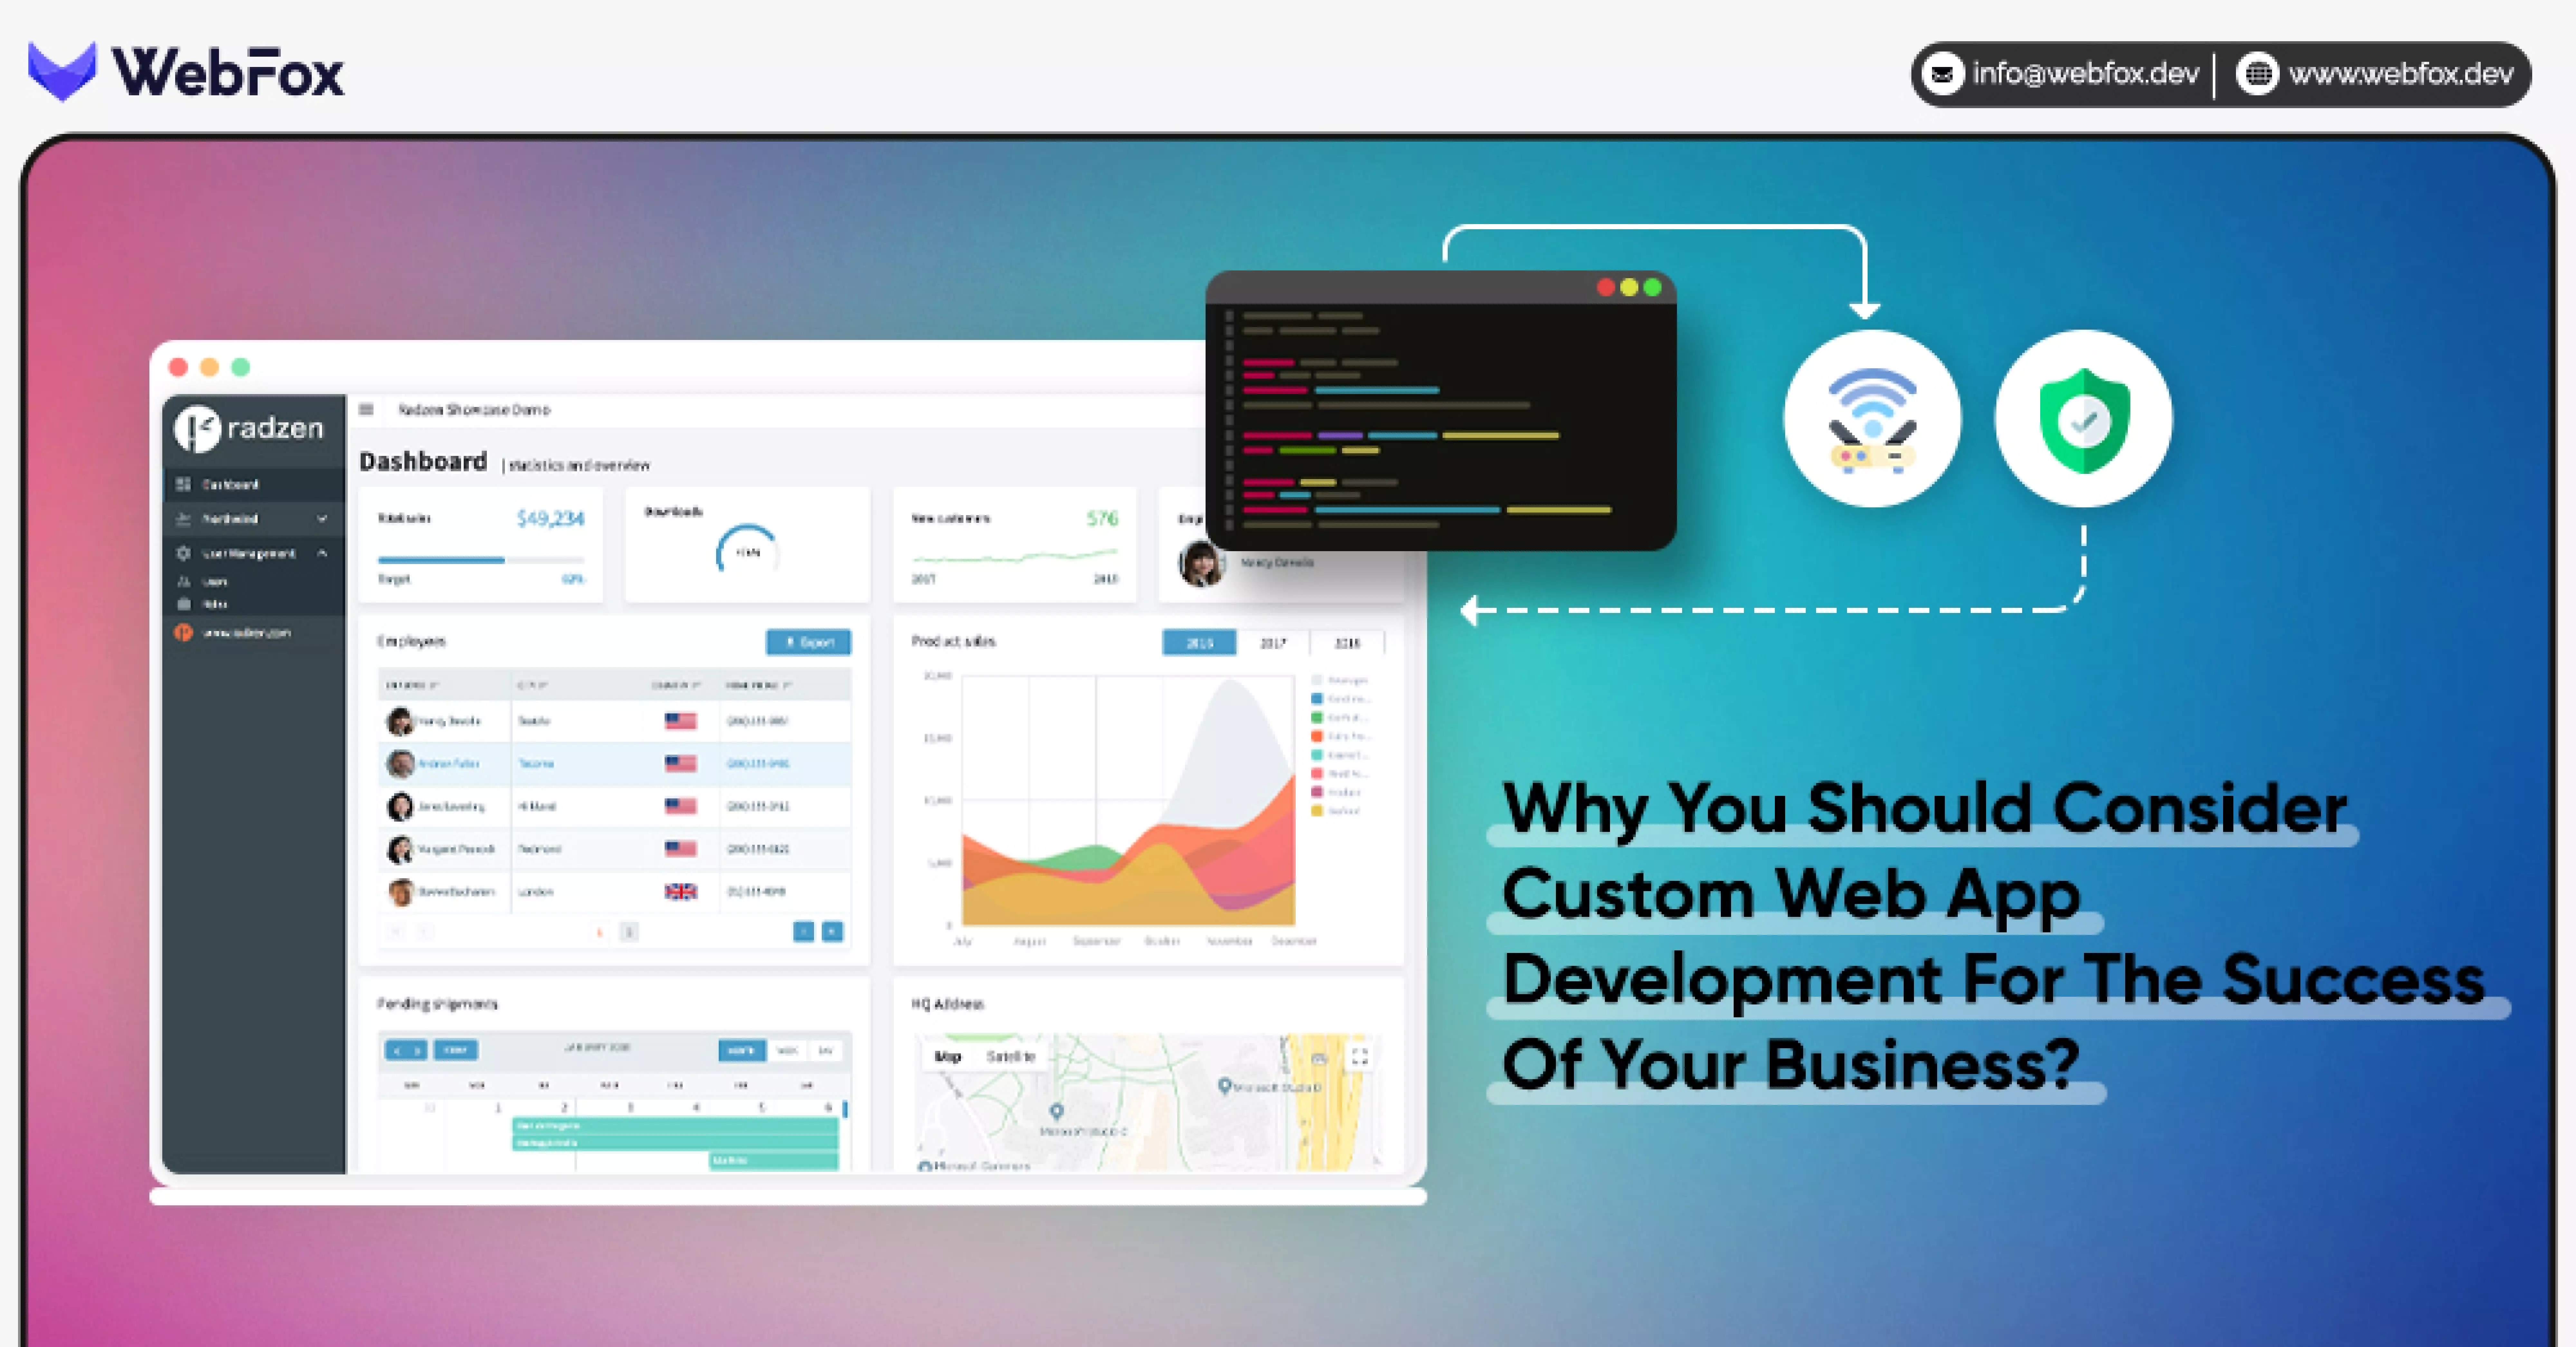 8 Reasons Why Custom Web Application Development Should Be The Focus Of Your Business